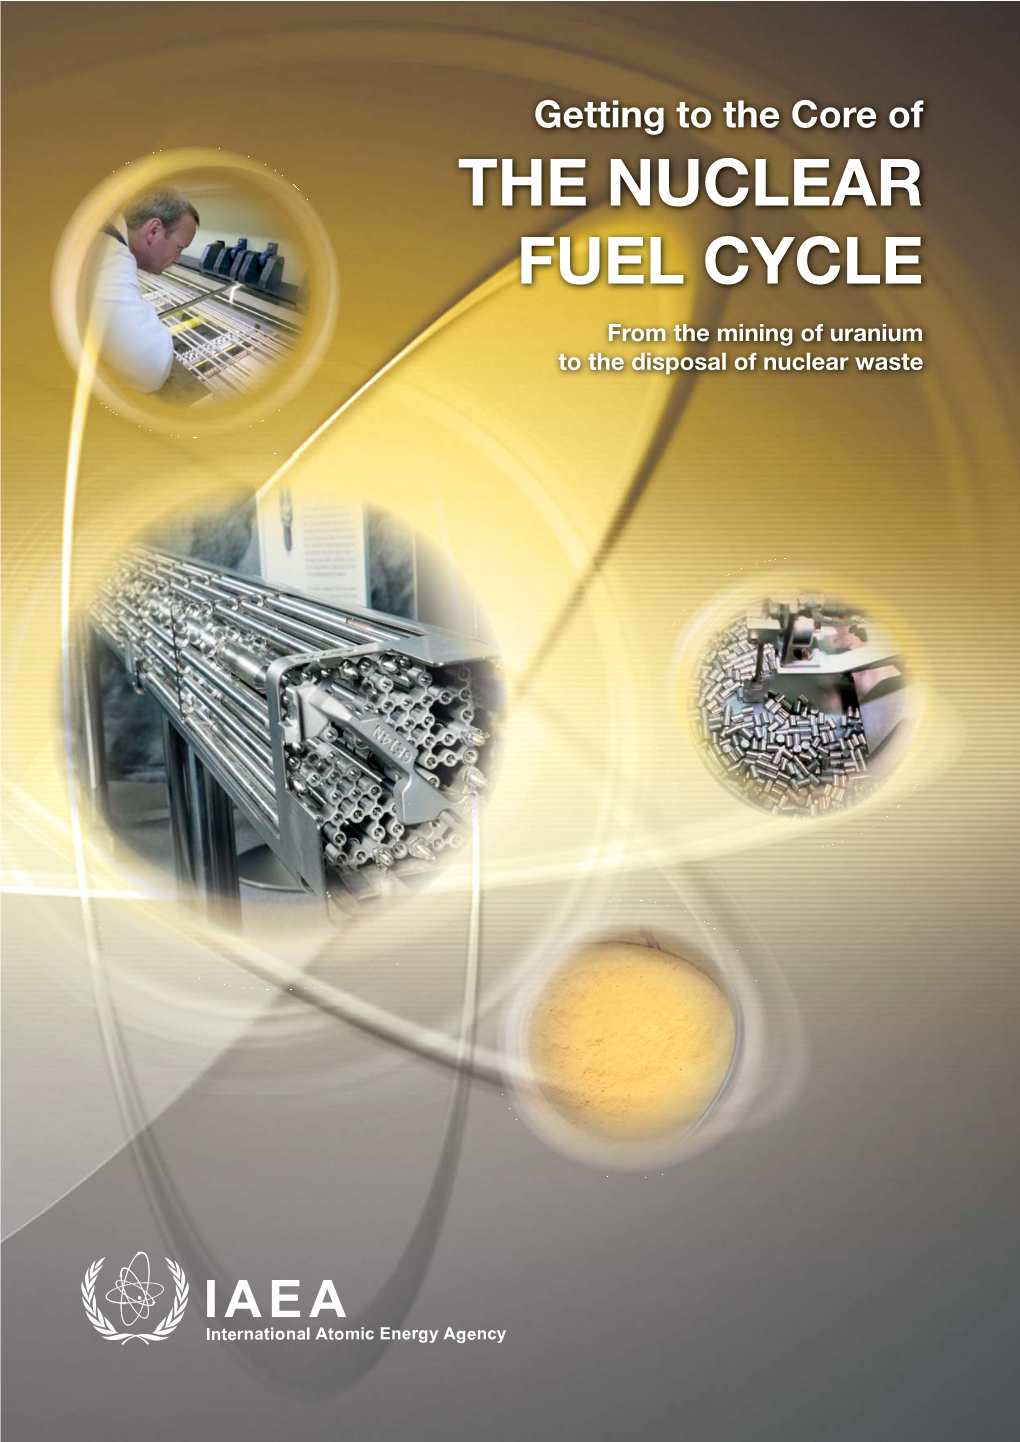 Getting to the Core of the NUCLEAR FUEL CYCLE